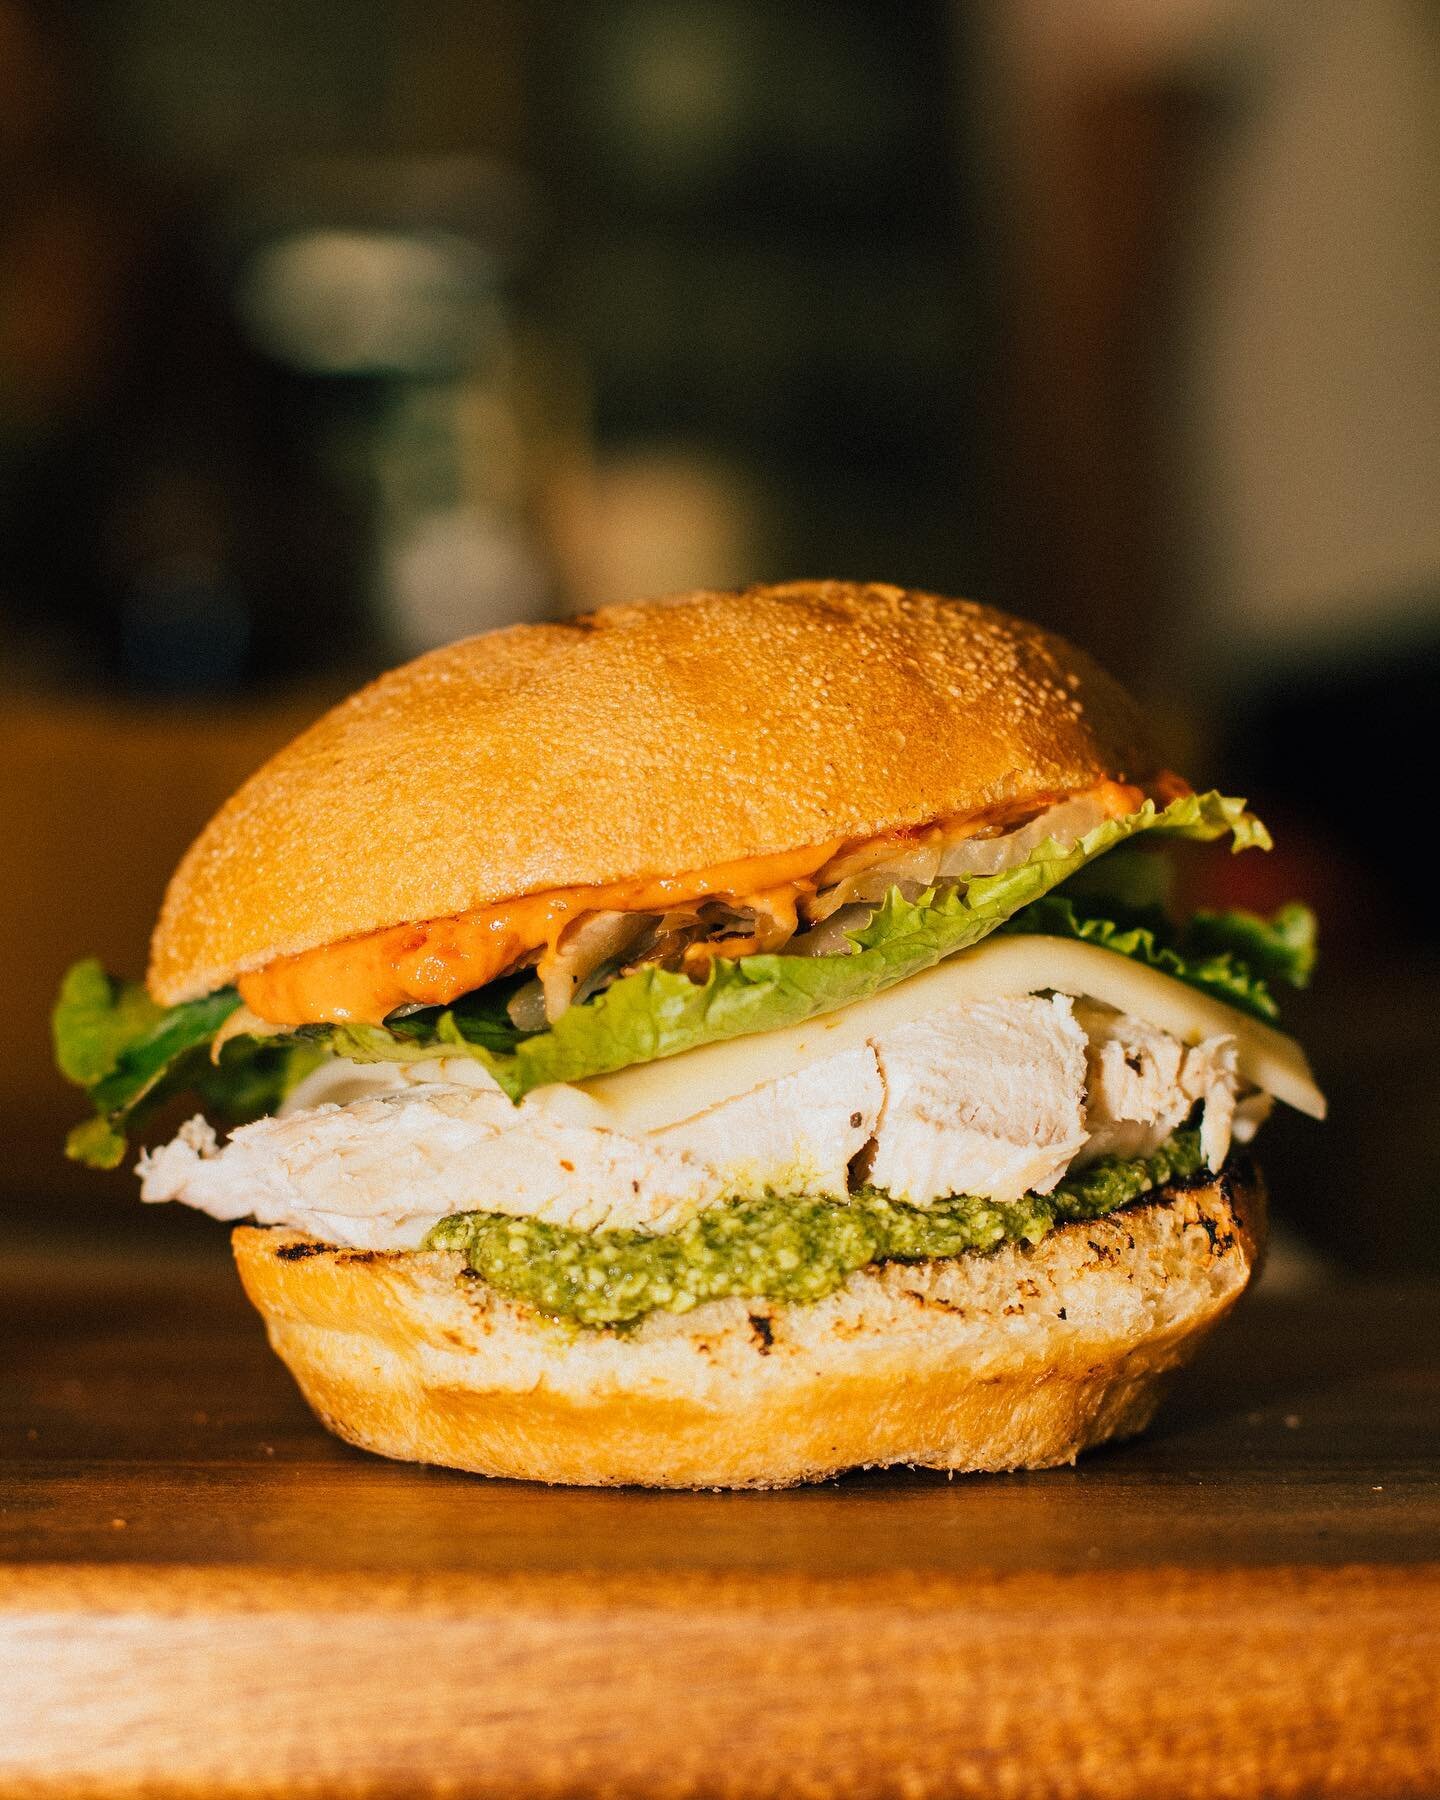 A nice pesto chicken sandwich glamour shot for you guys on this lovely Friday 🌼 Just in case you&rsquo;re needing some lunch-spo 

Deets as always: chargrilled chicken, basil pesto, smoked provolone, caramelized onions, leaf lettuce, on a ciabatta r